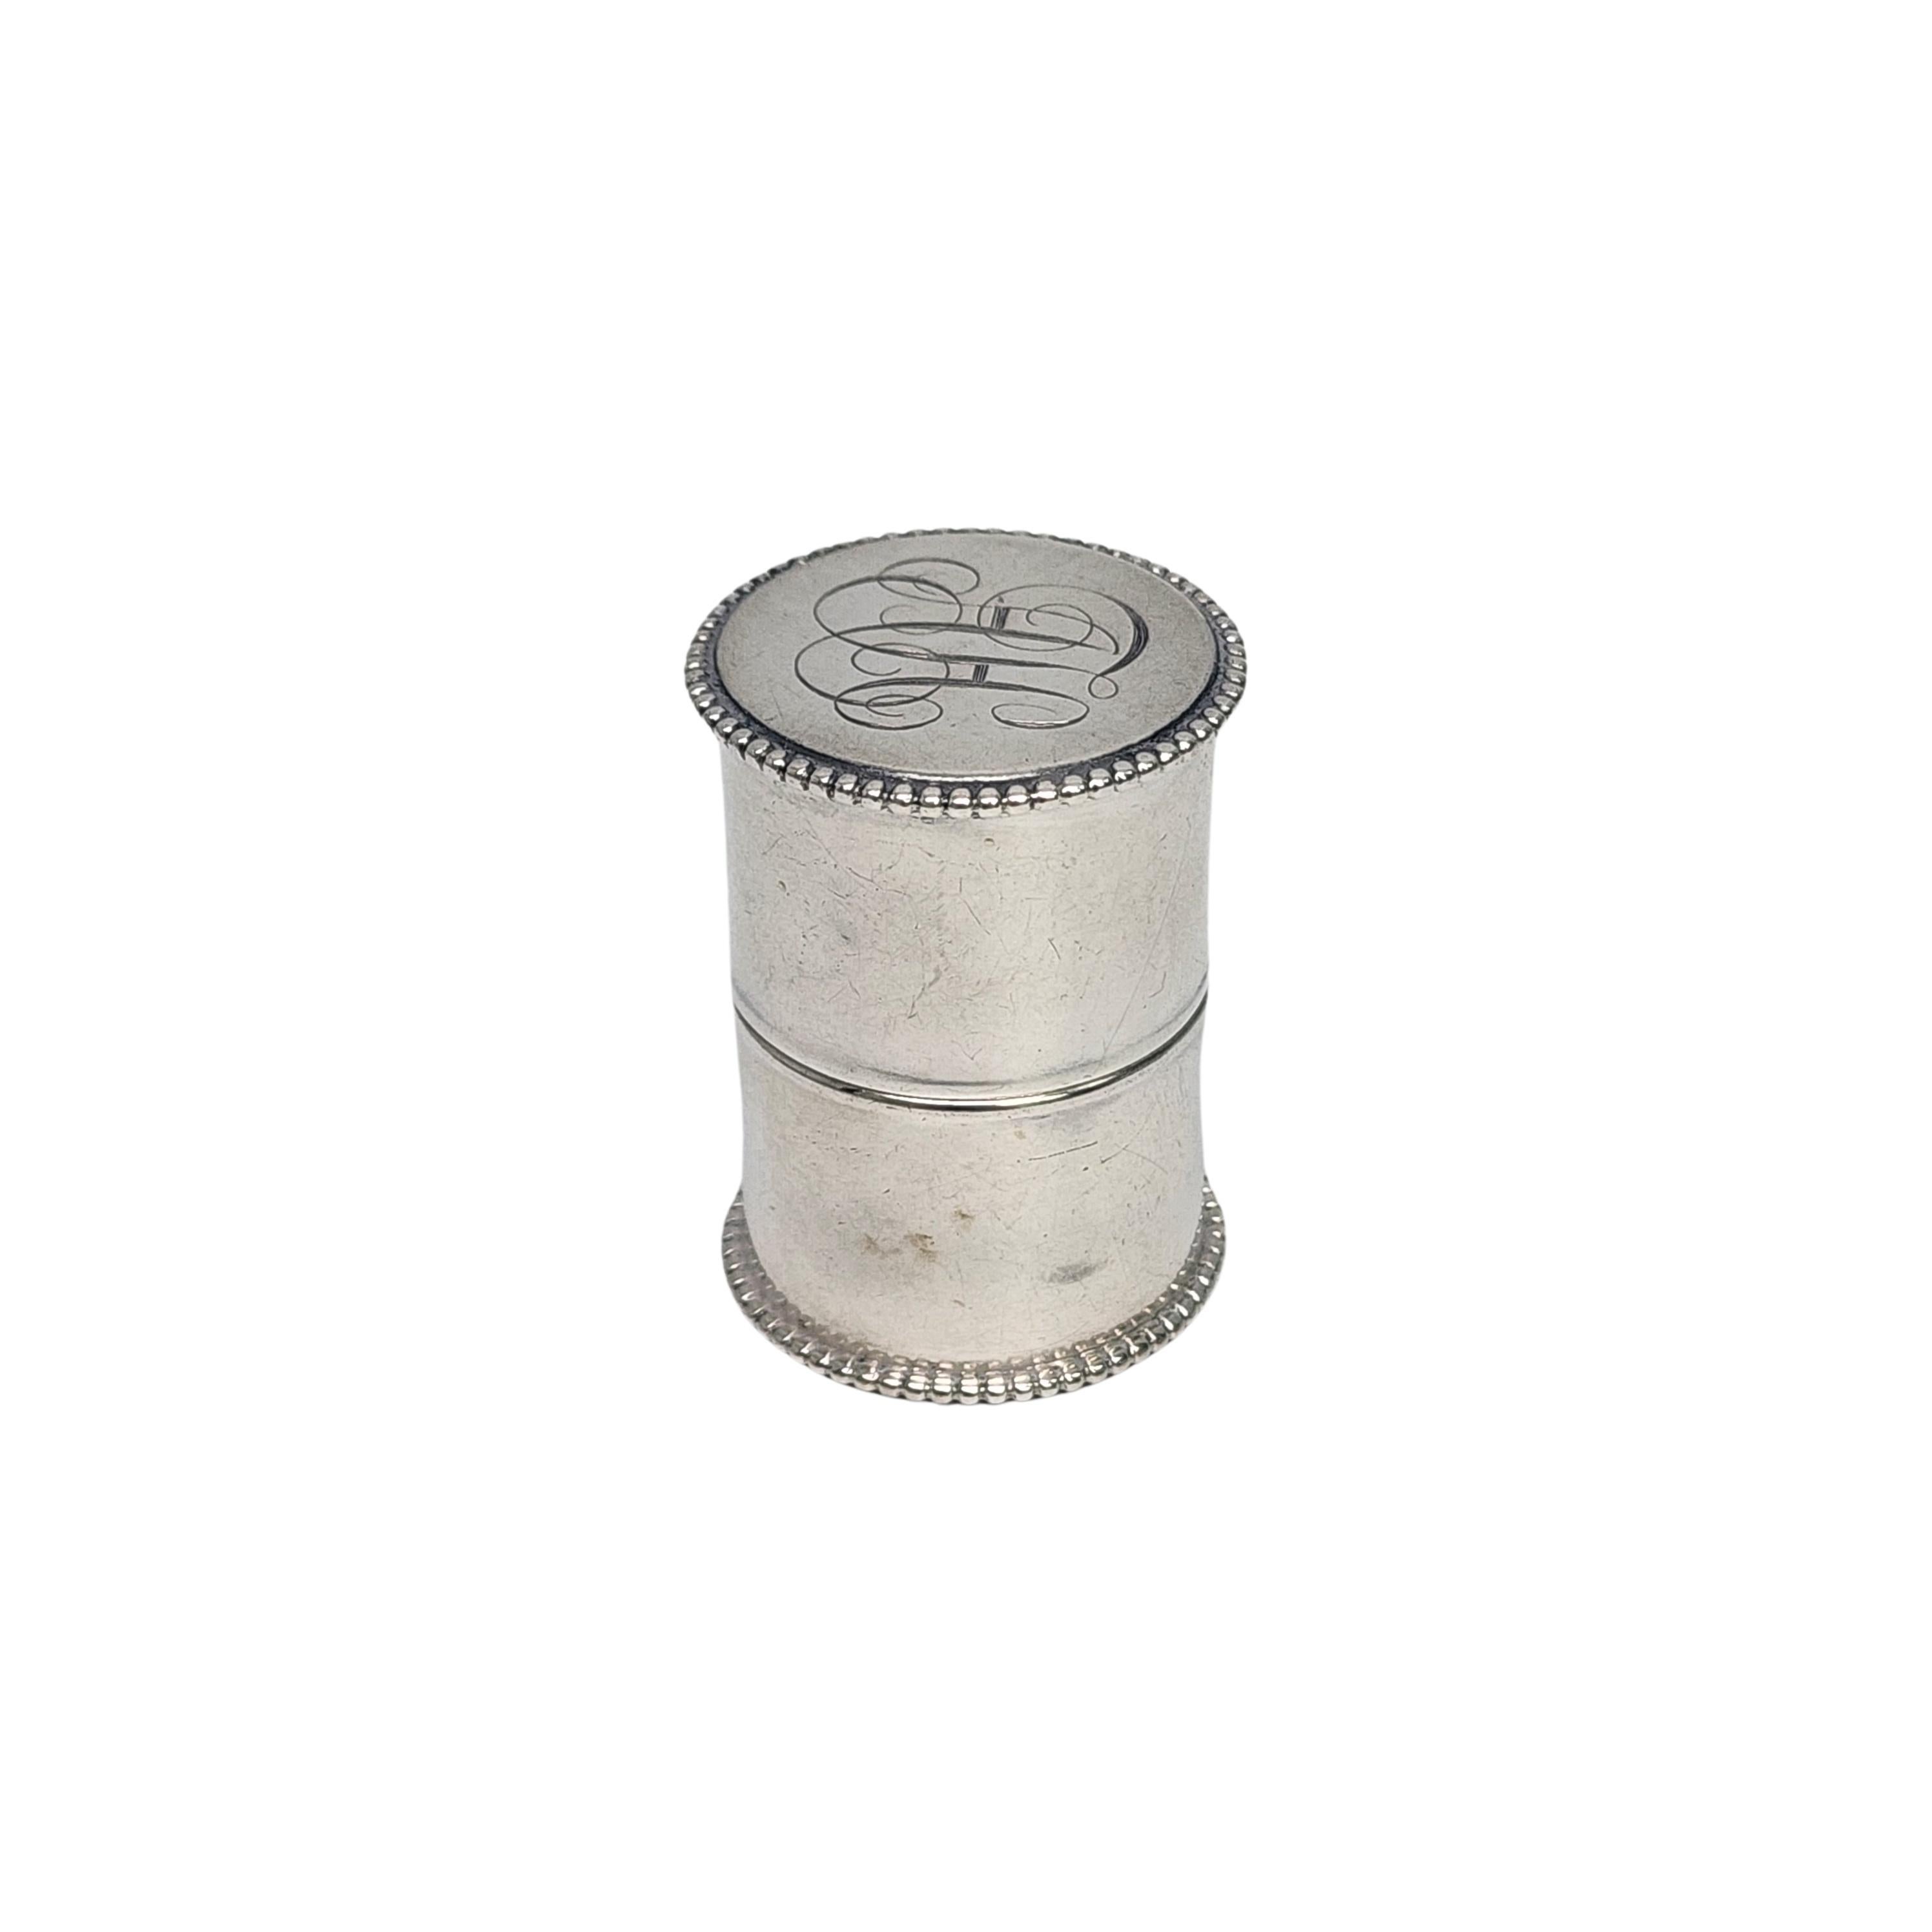 Antique sterling silver thread case with monogram.

Monogram appears to be AH

This cylindrical case holds a spool of thread and dispenses it through a slit with a small opening for the thread. The edges have a beaded edge, the monogram is on the